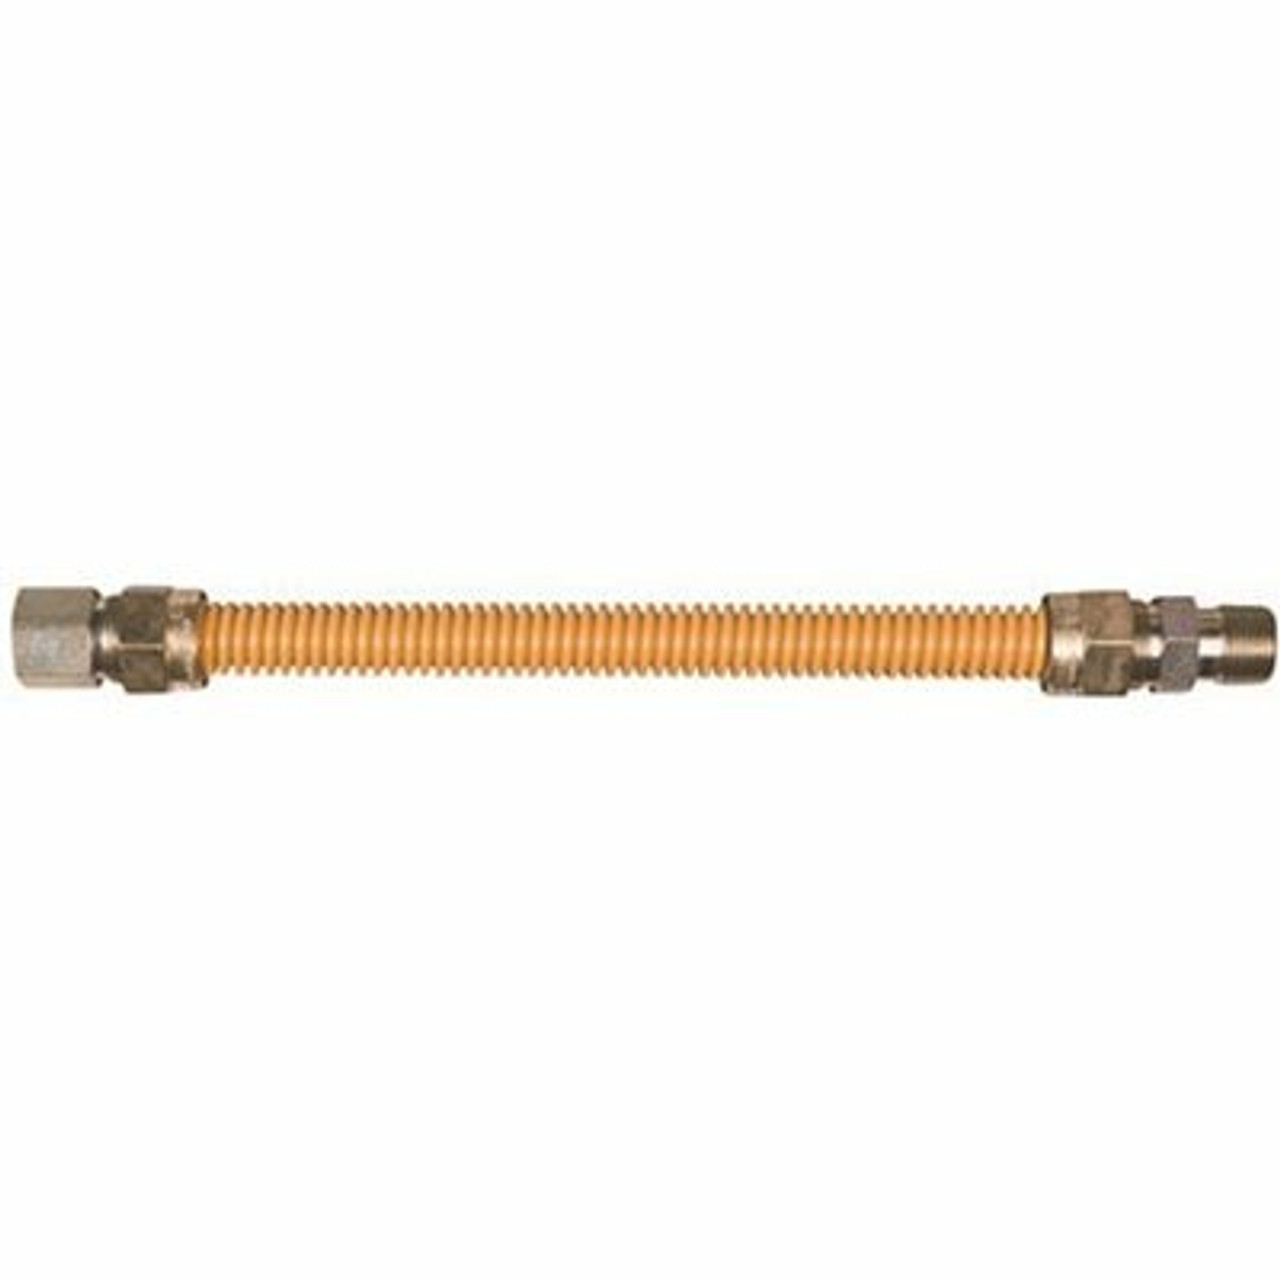 Watts Stainless Steel Gas Appliance Connector, Yellow Coated, 3/8 In. Od, 1/4 In. Id, 1/2 In. Mnpt X 1/2 In. Fnpt, 48 In. L